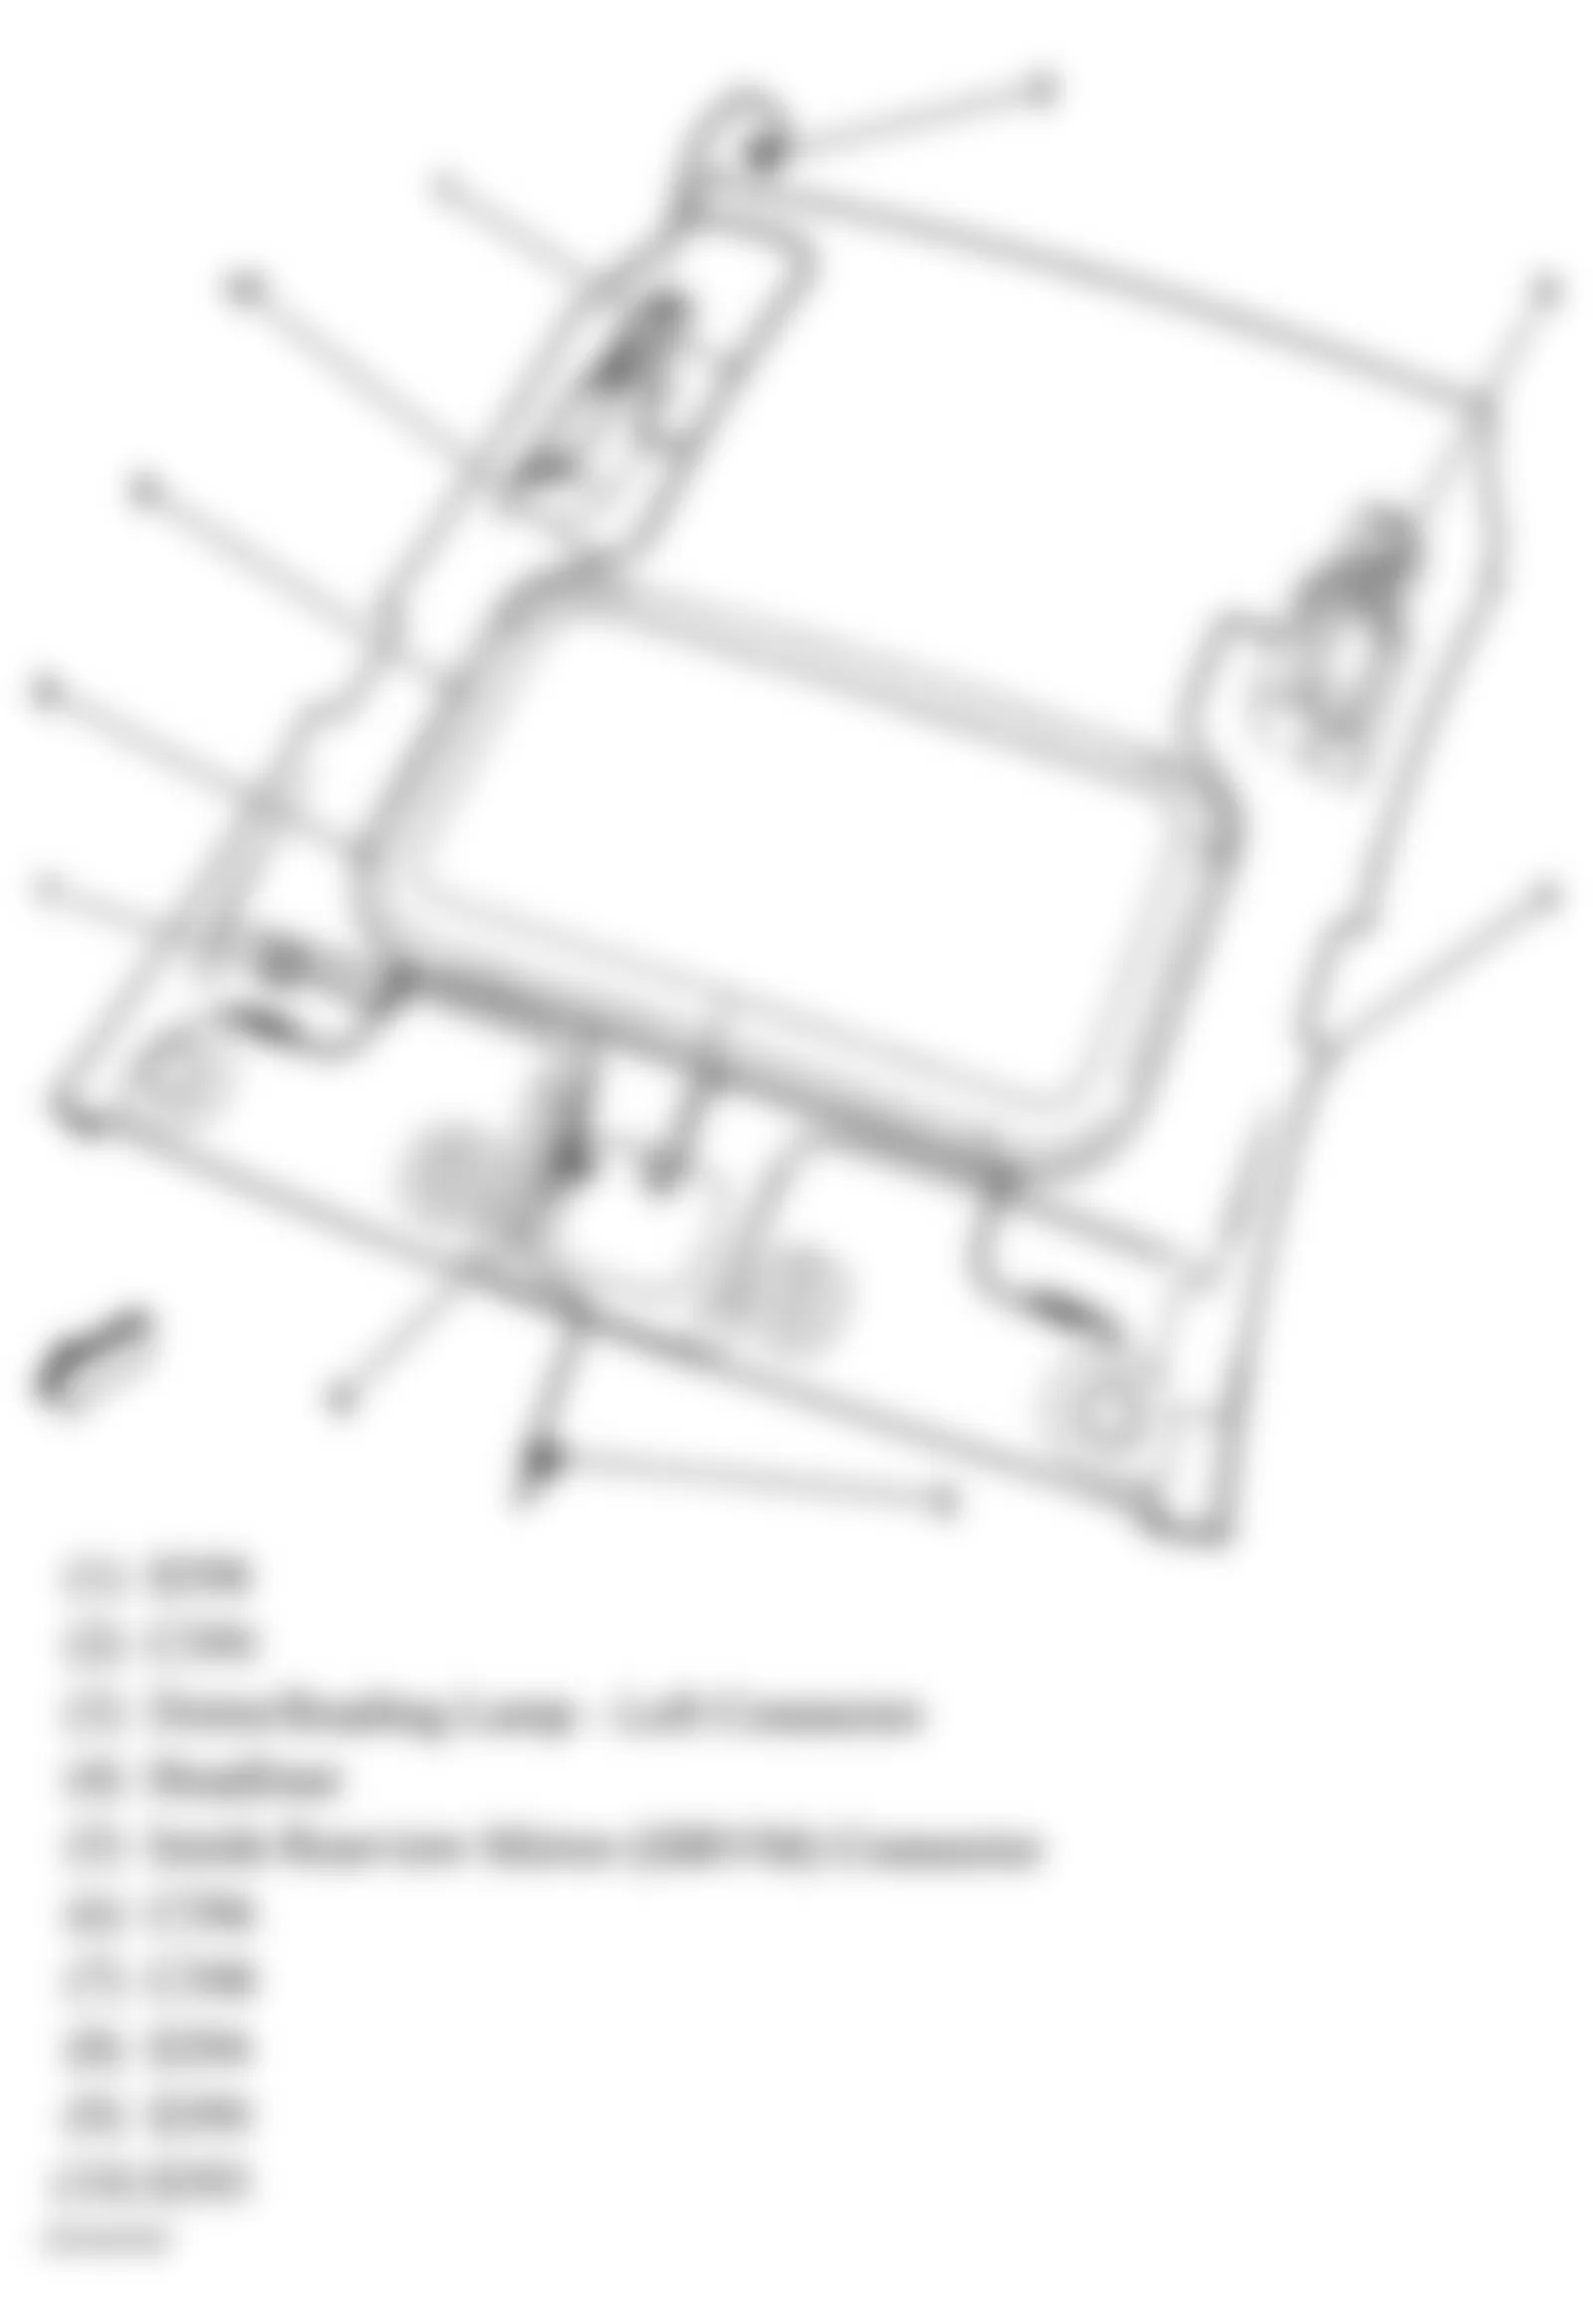 Buick LaCrosse CXL 2005 - Component Locations -  Headliner Assembly